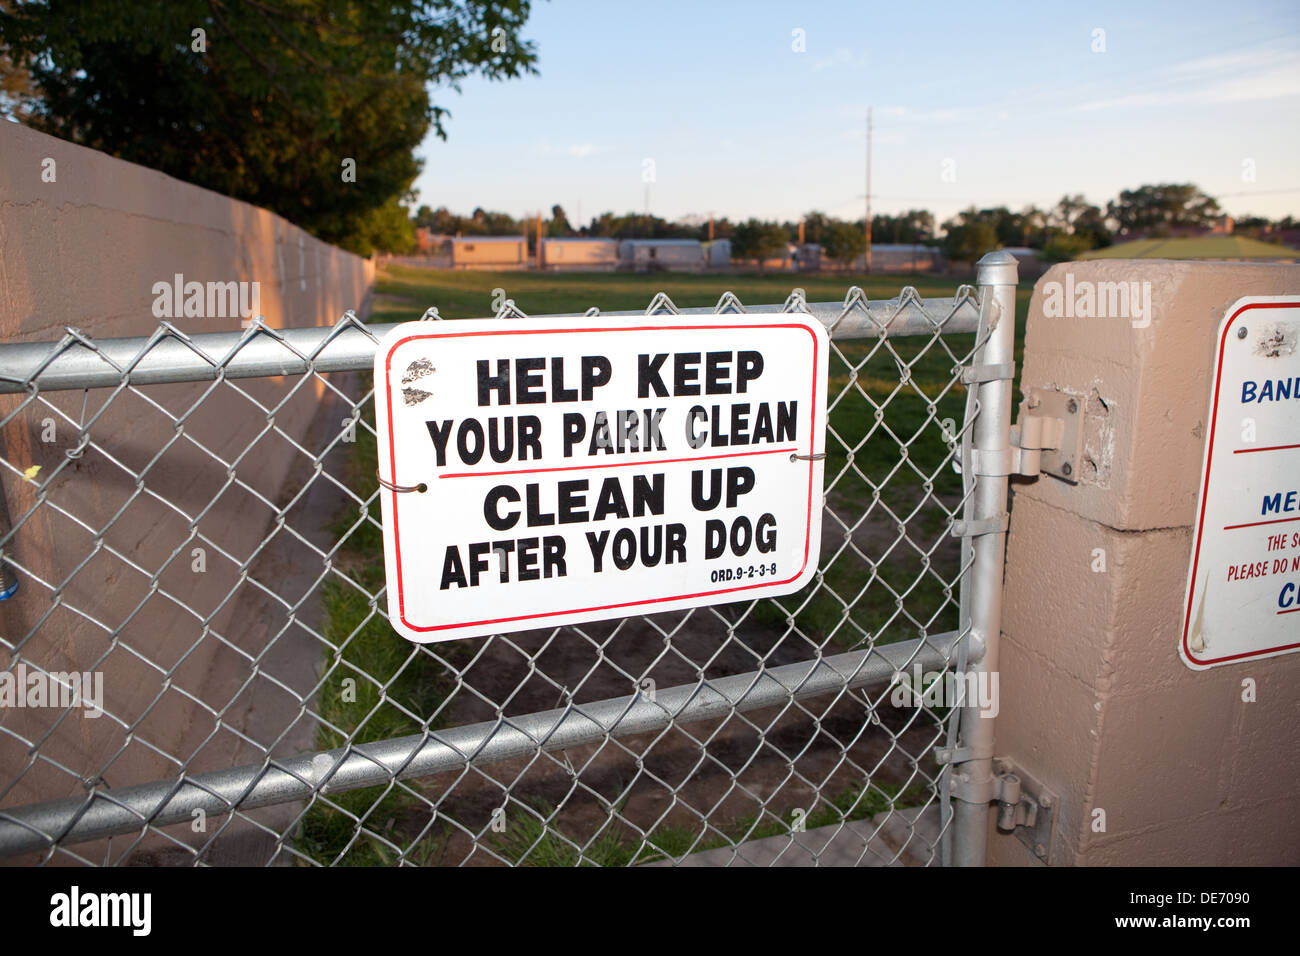 Sign at dog park asking owners to clean up after their dog. Stock Photo